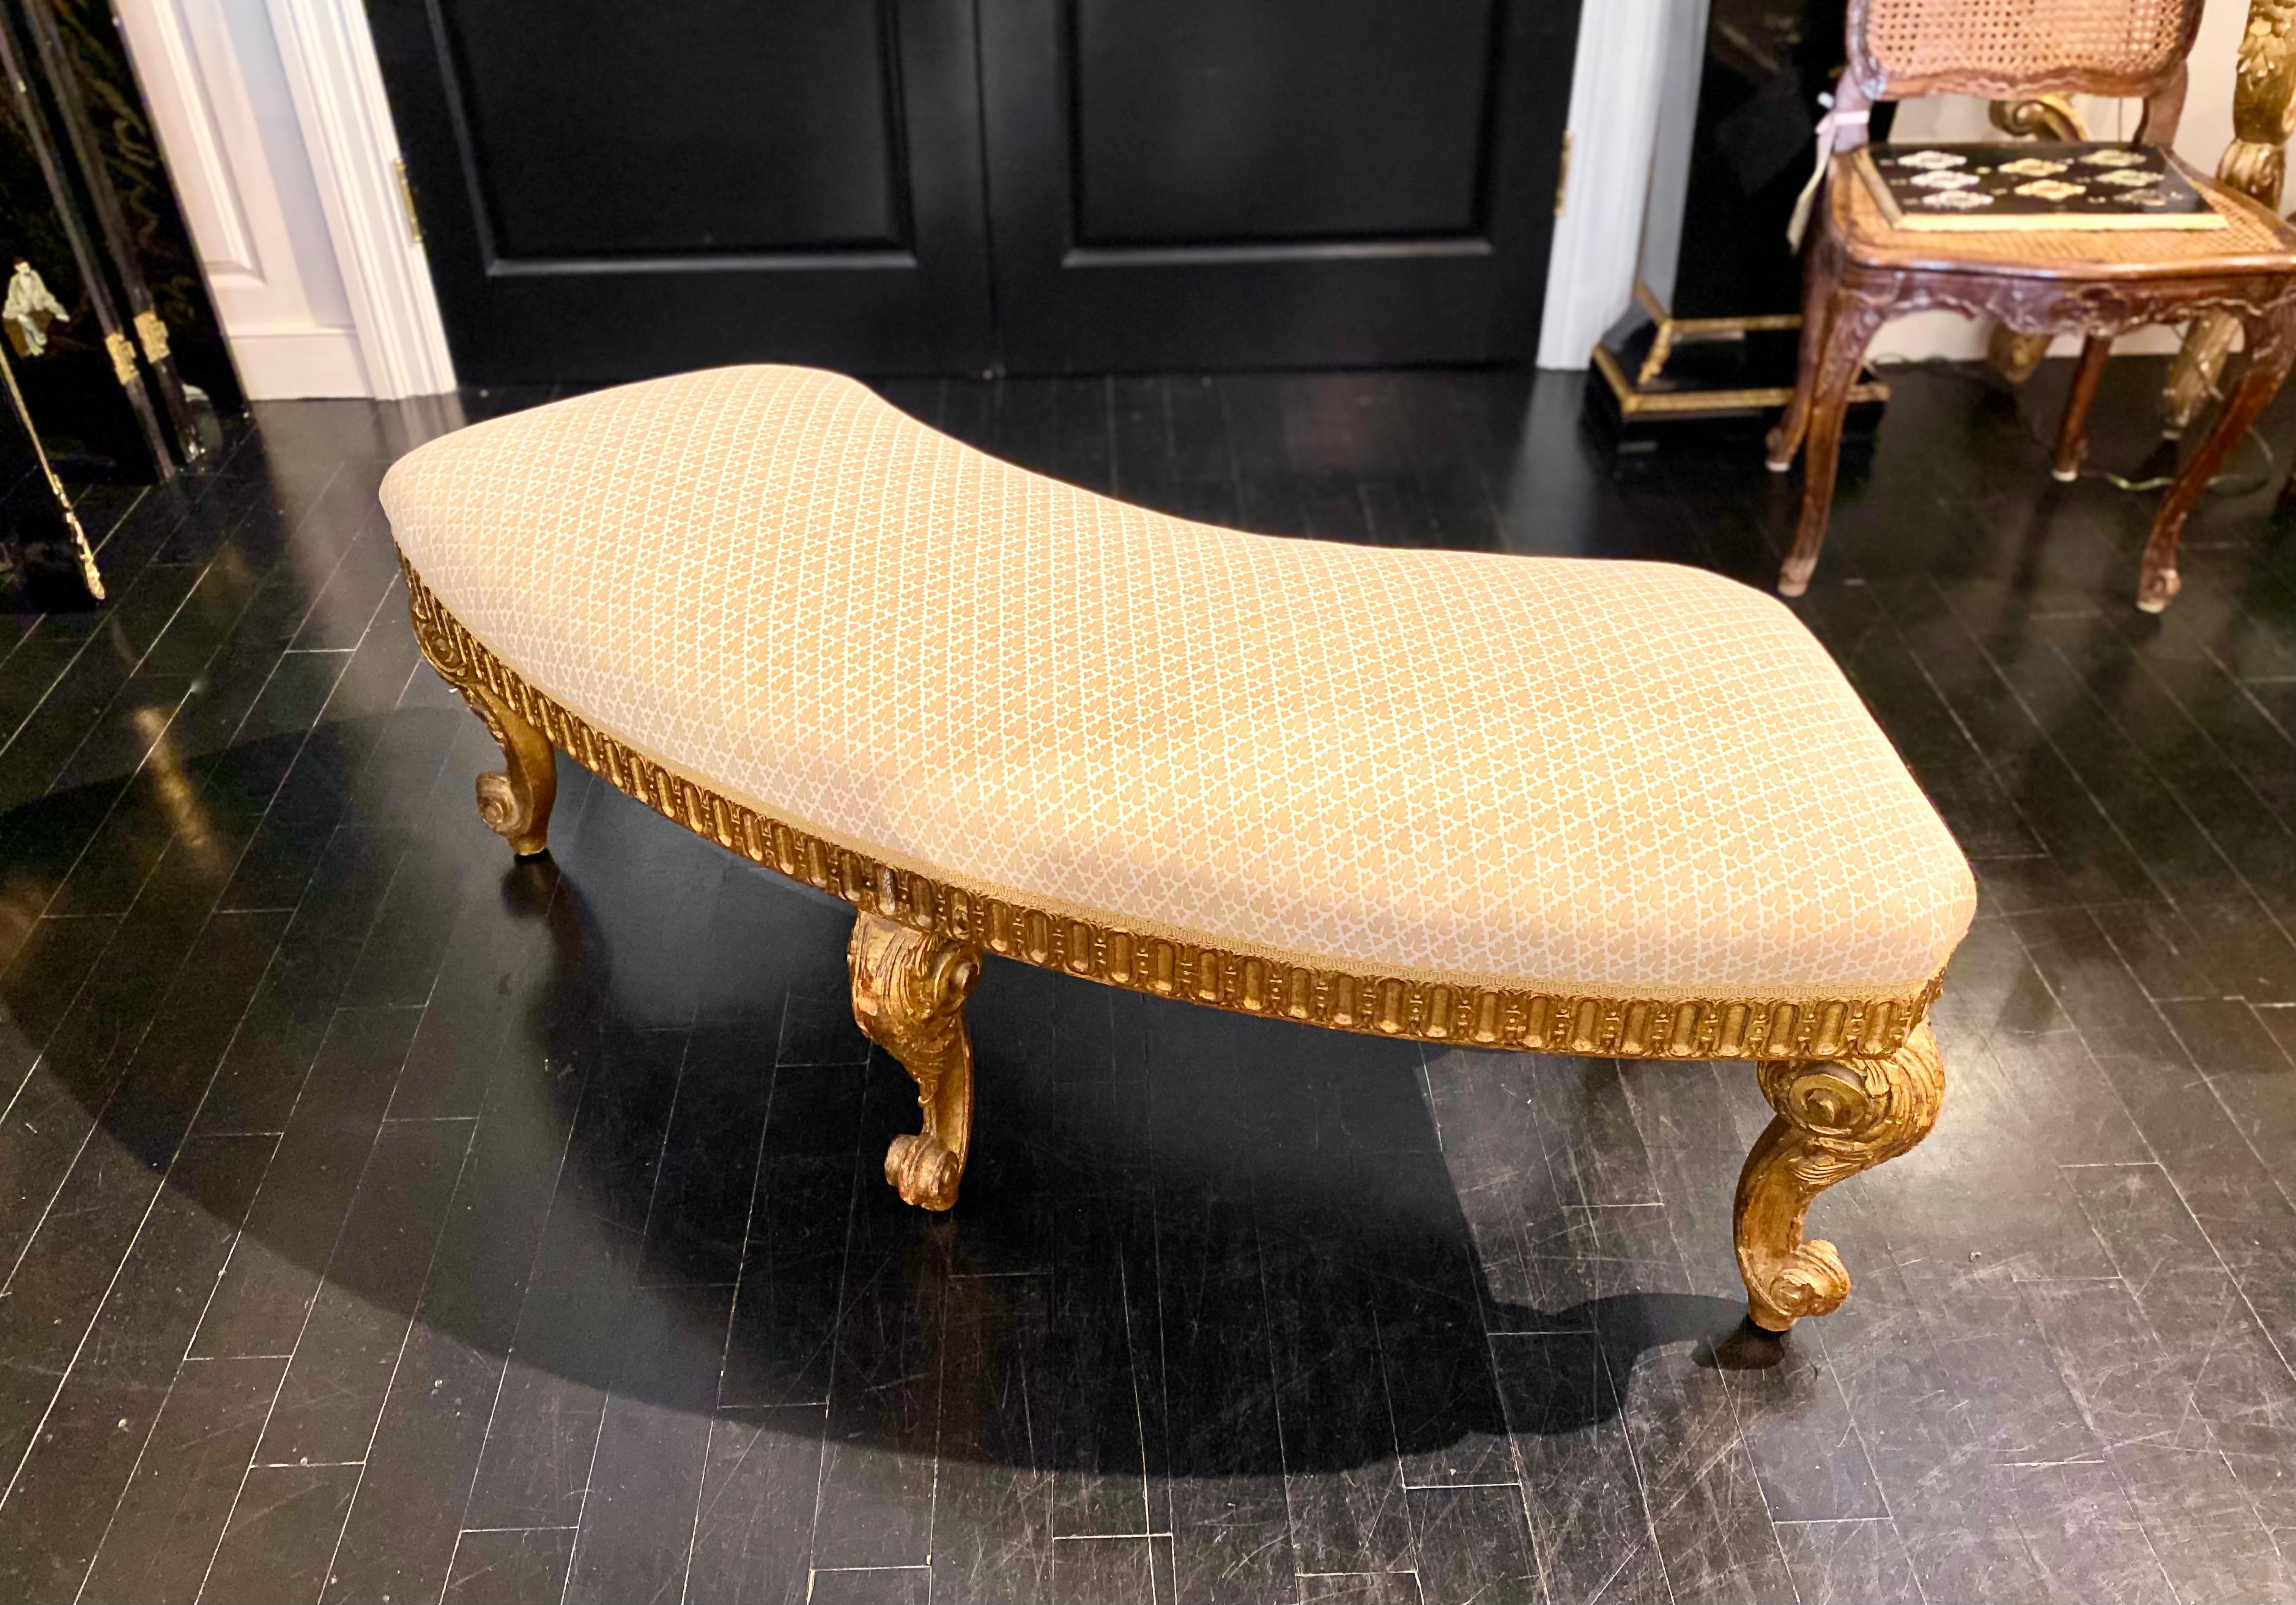 French Louis XVI Style Giltwood Semi-Circular Bench, Jacob-Inspired Model In Good Condition For Sale In Montreal, Quebec